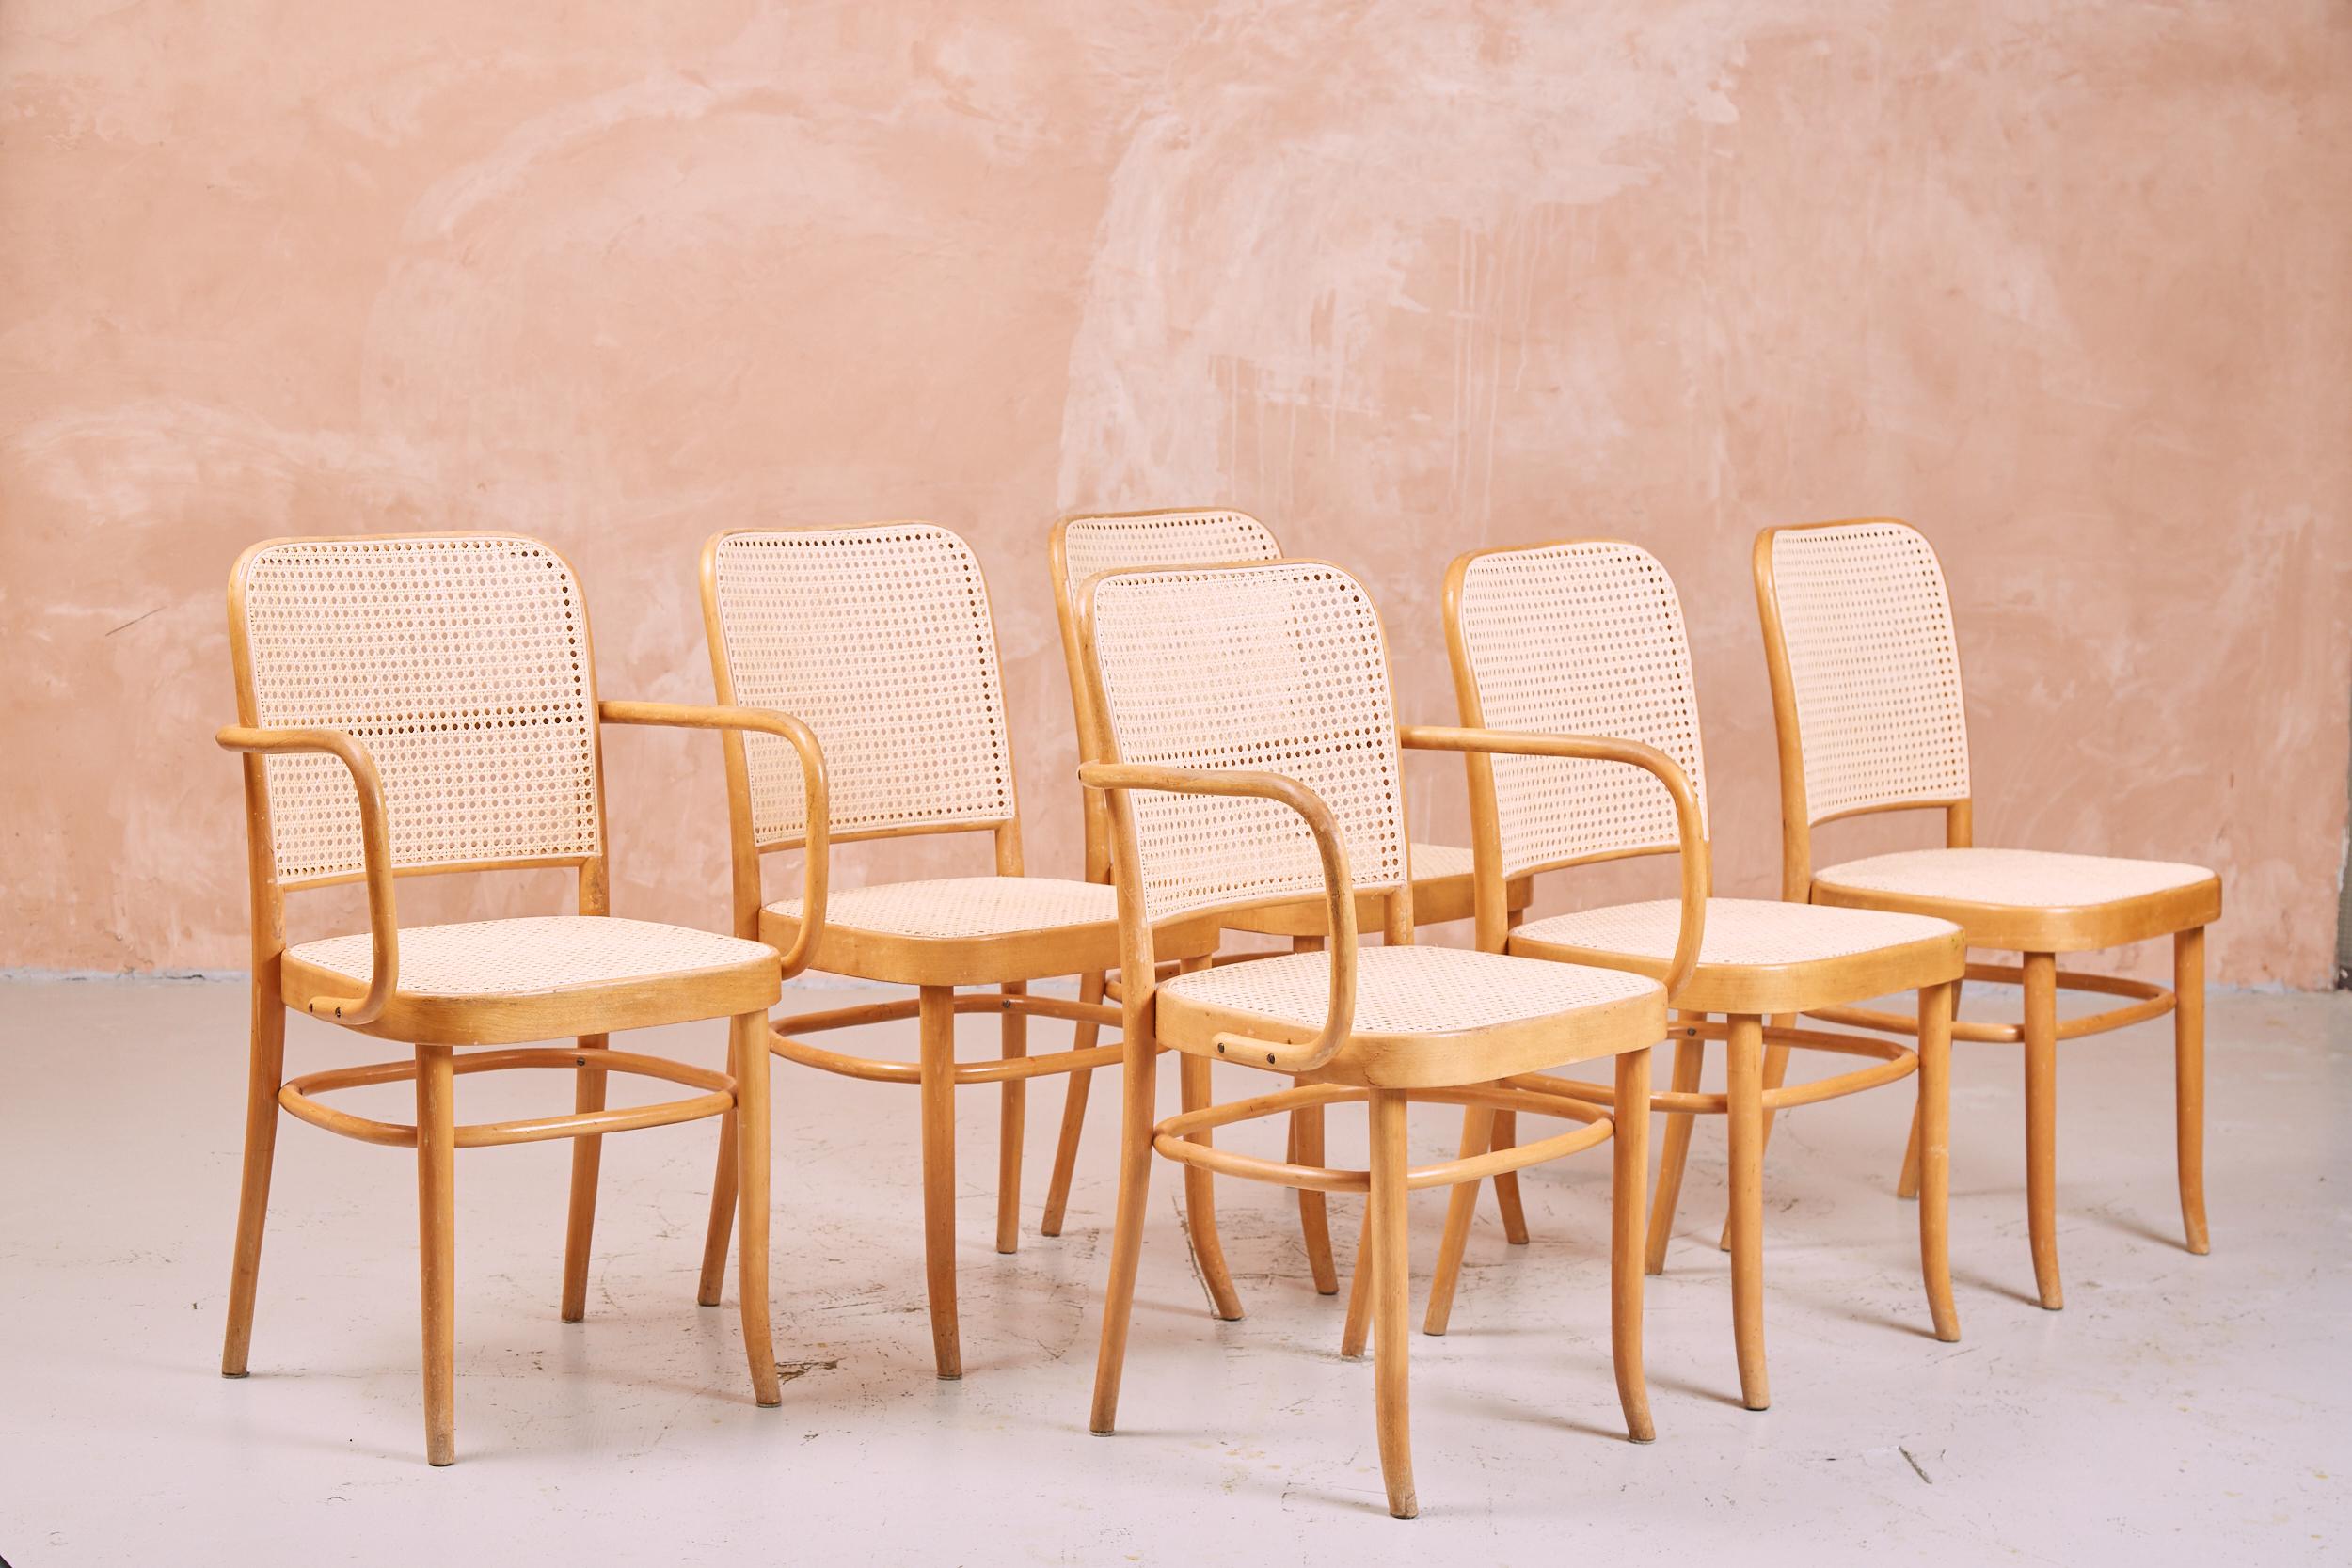 Set of six beech and rattan Prague chairs, designed by Josef Hoffmann and Josef Frank for Thonet in the 1930s.